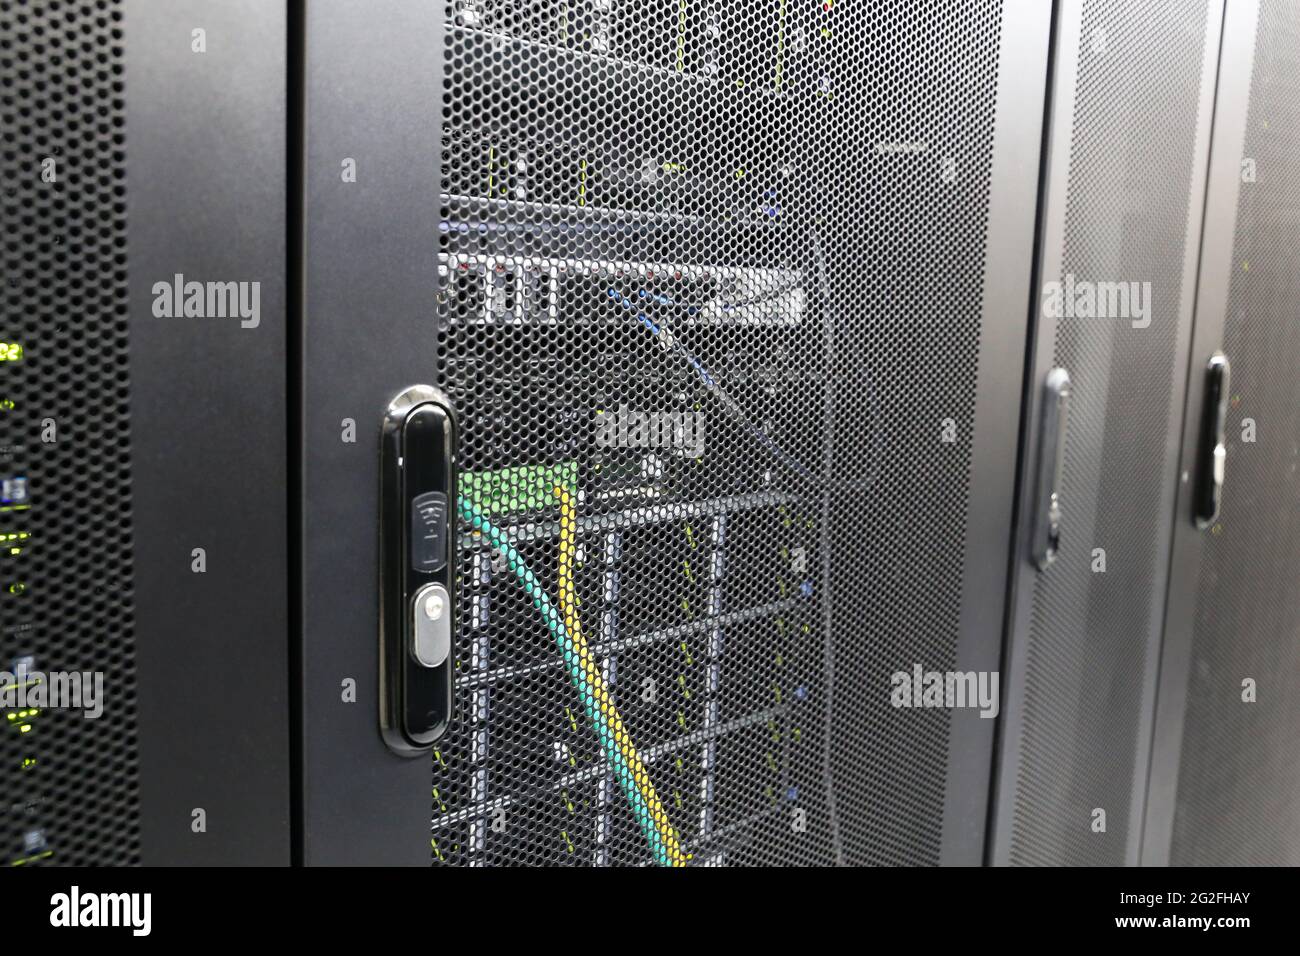 Electronic lock on server rack in data center. Server room, computer network security Stock Photo